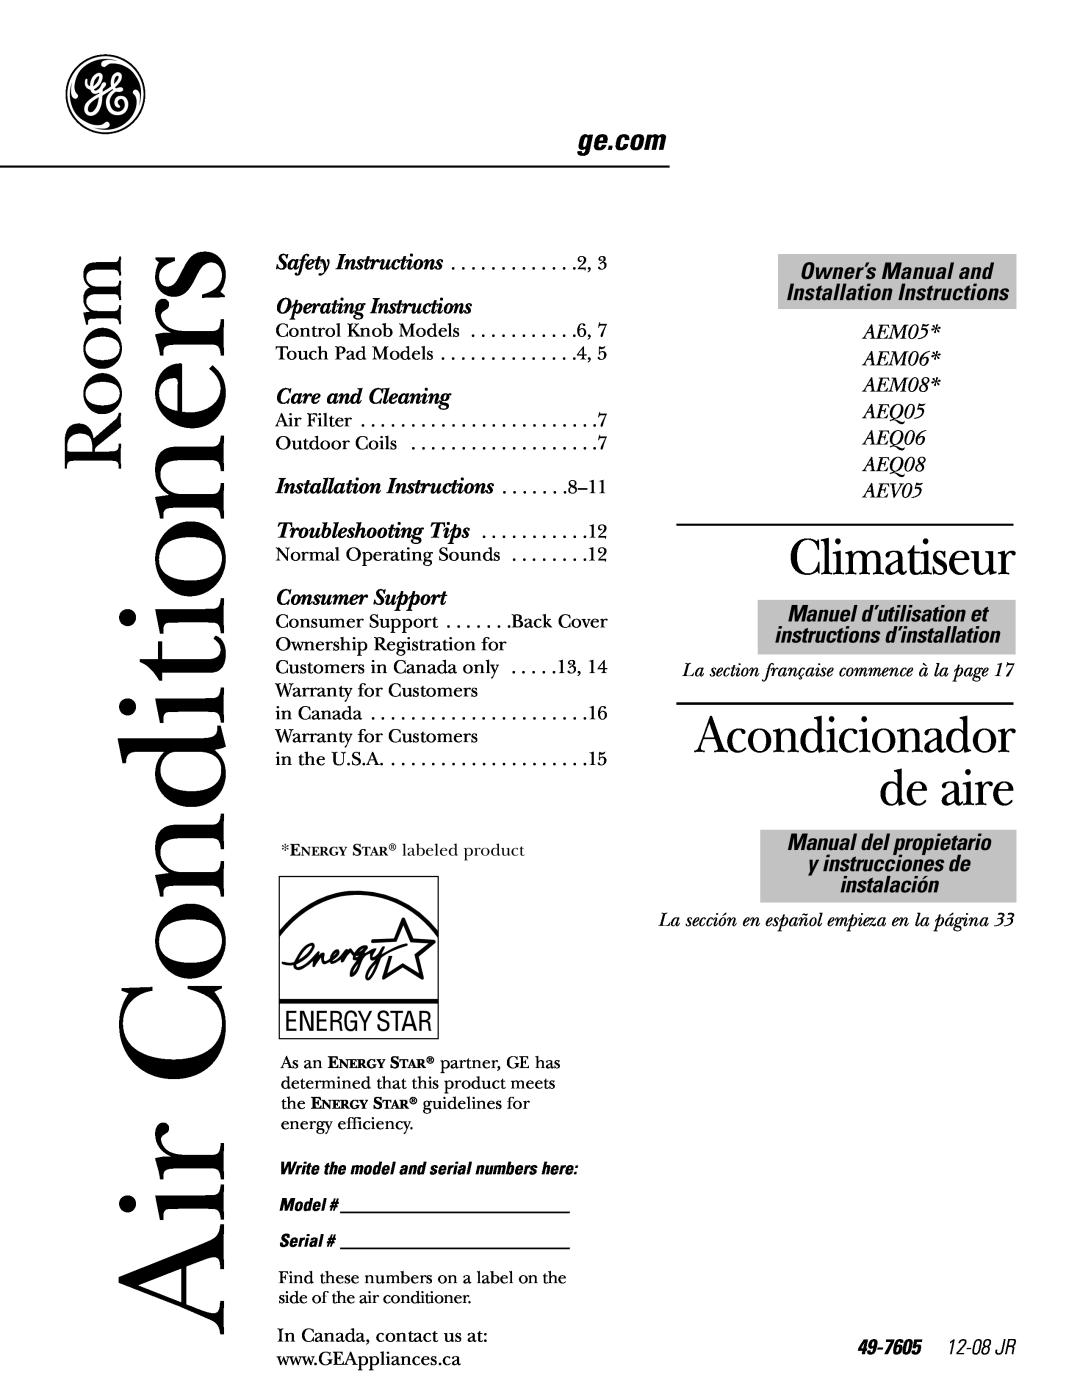 GE AEQ05 installation instructions Climatiseur, Acondicionador de aire, Room, Operating Instructions, Care and Cleaning 